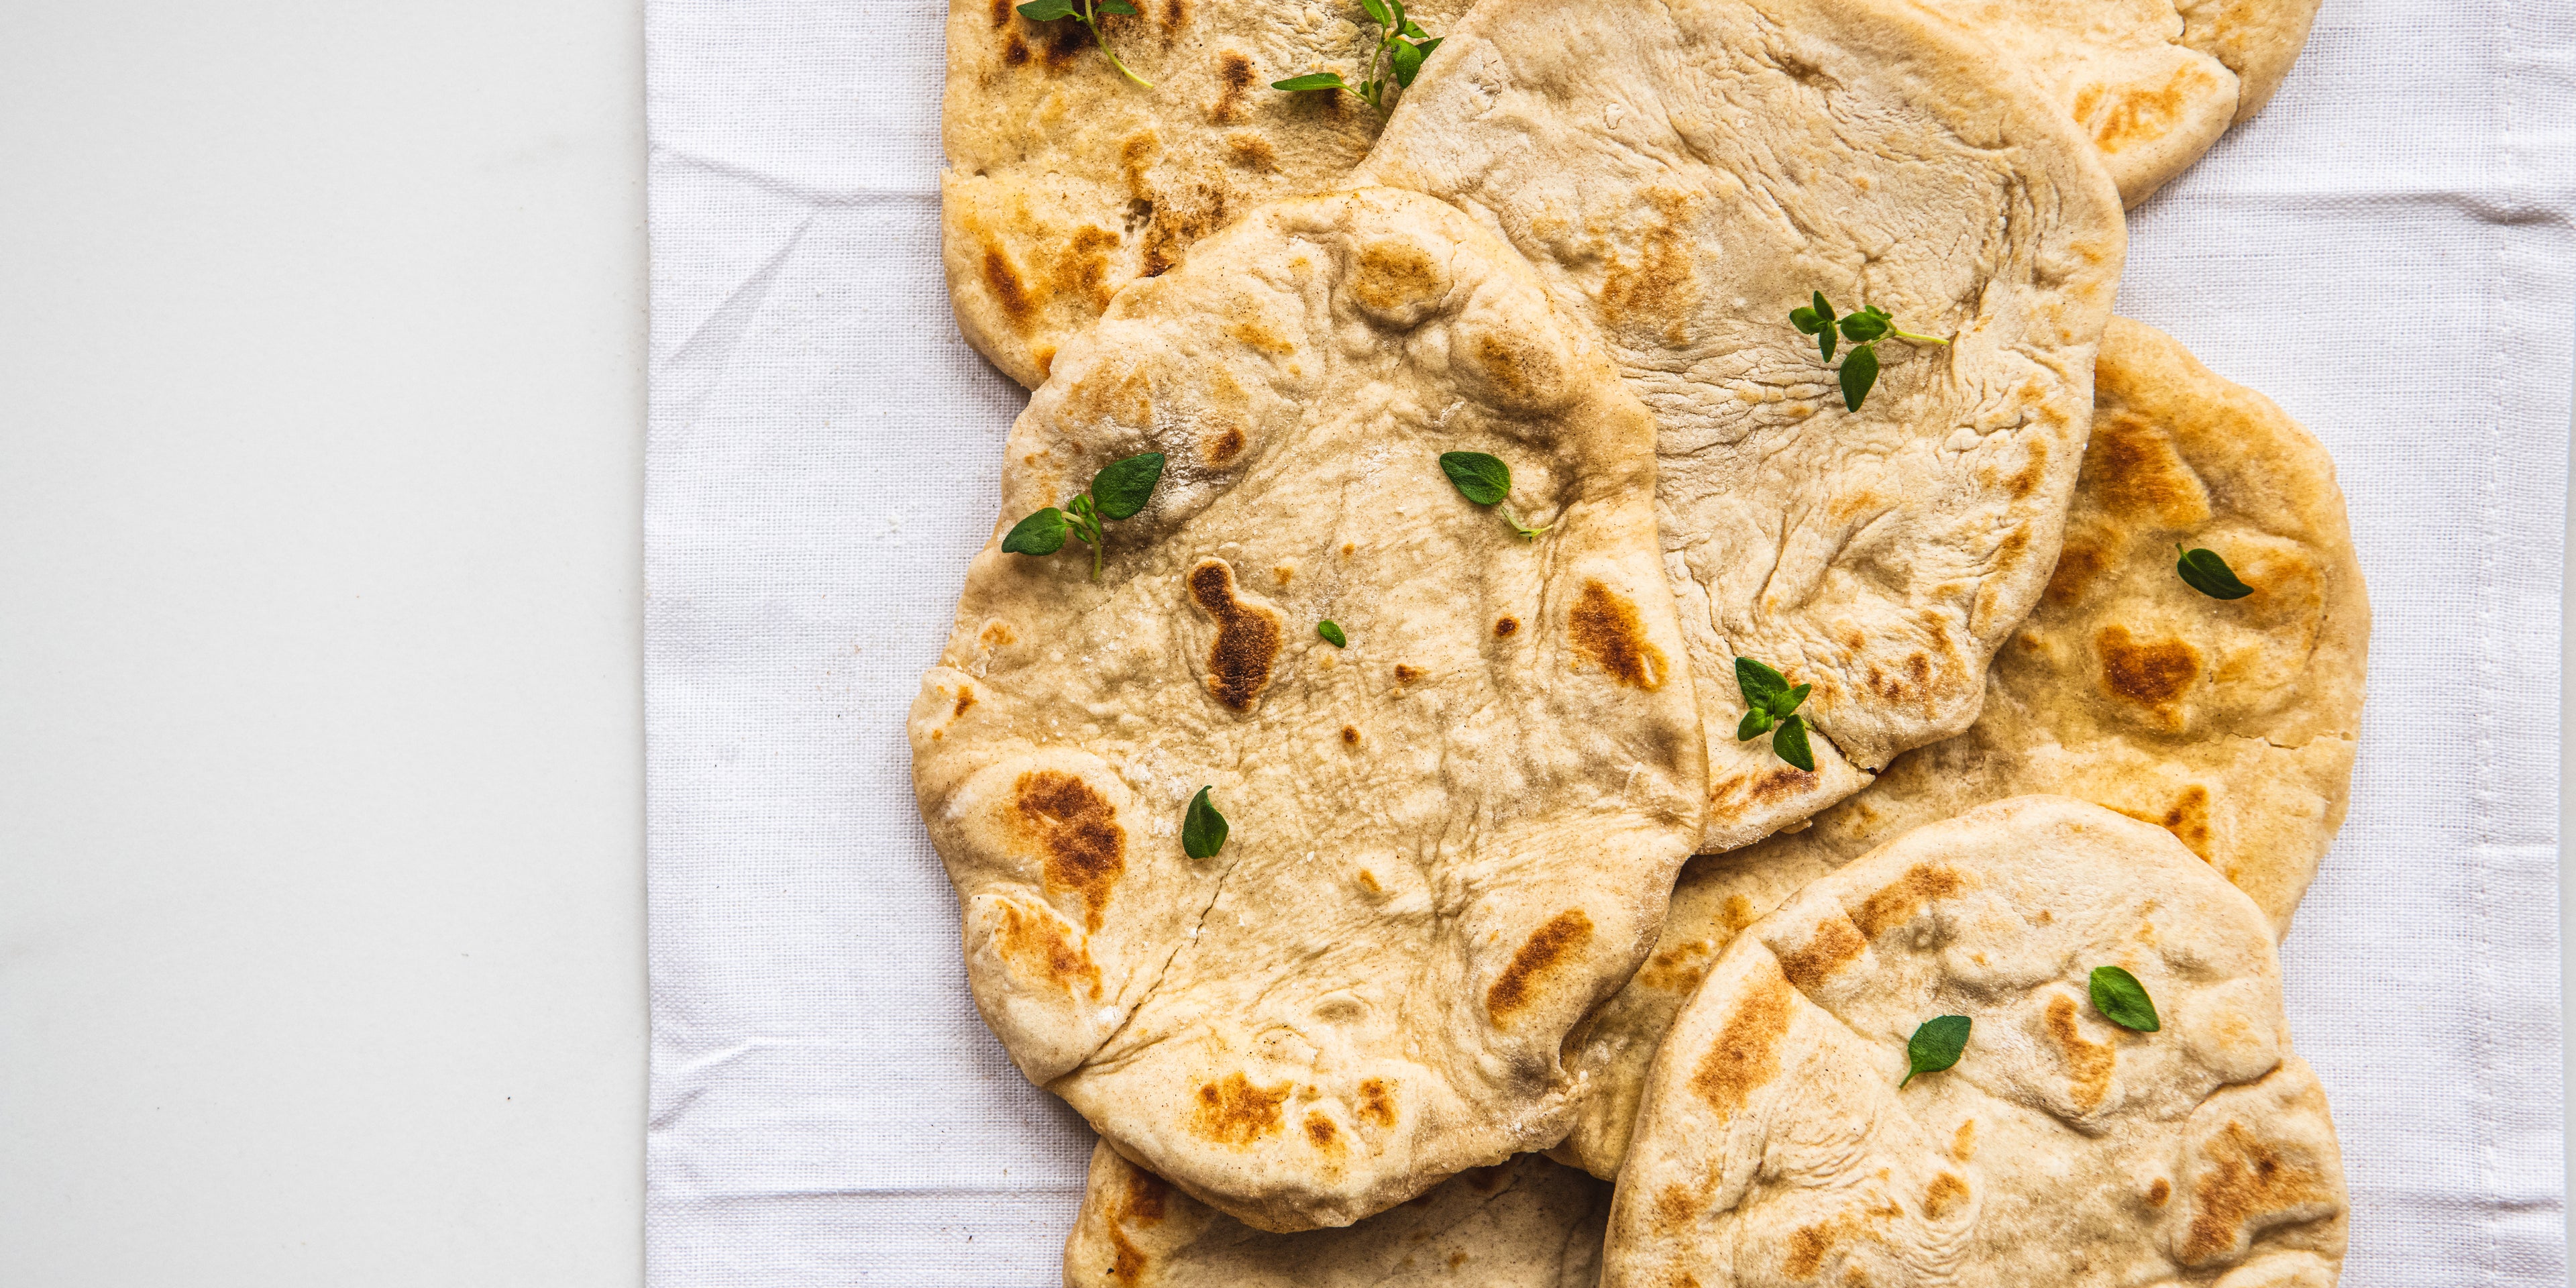 Top down view of a plate of kefir flatbread 